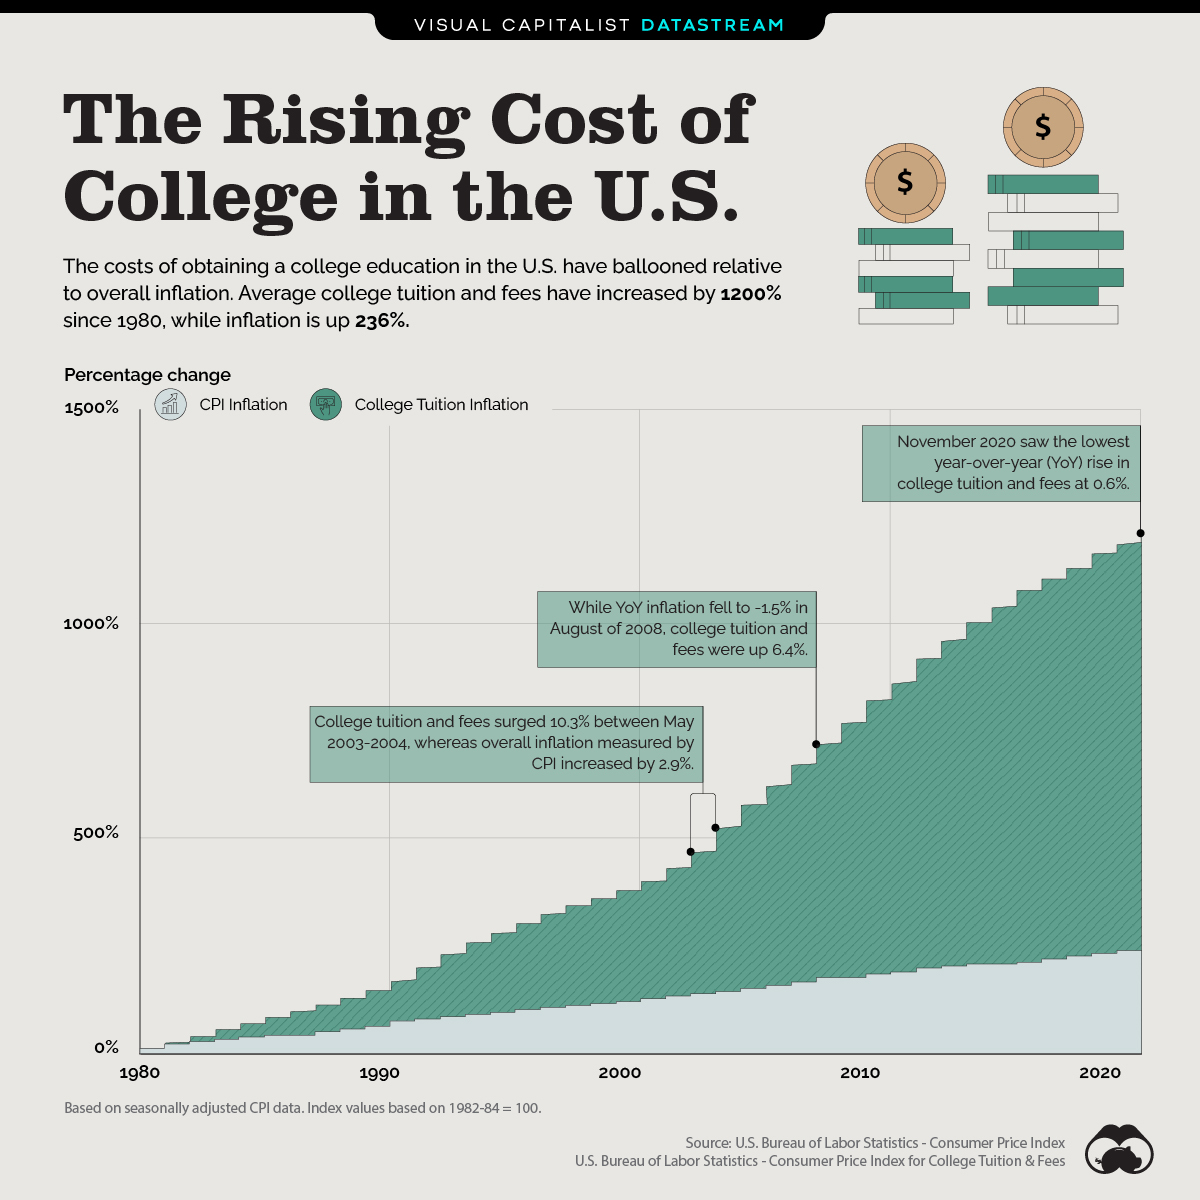 average cost of college in the U.S.